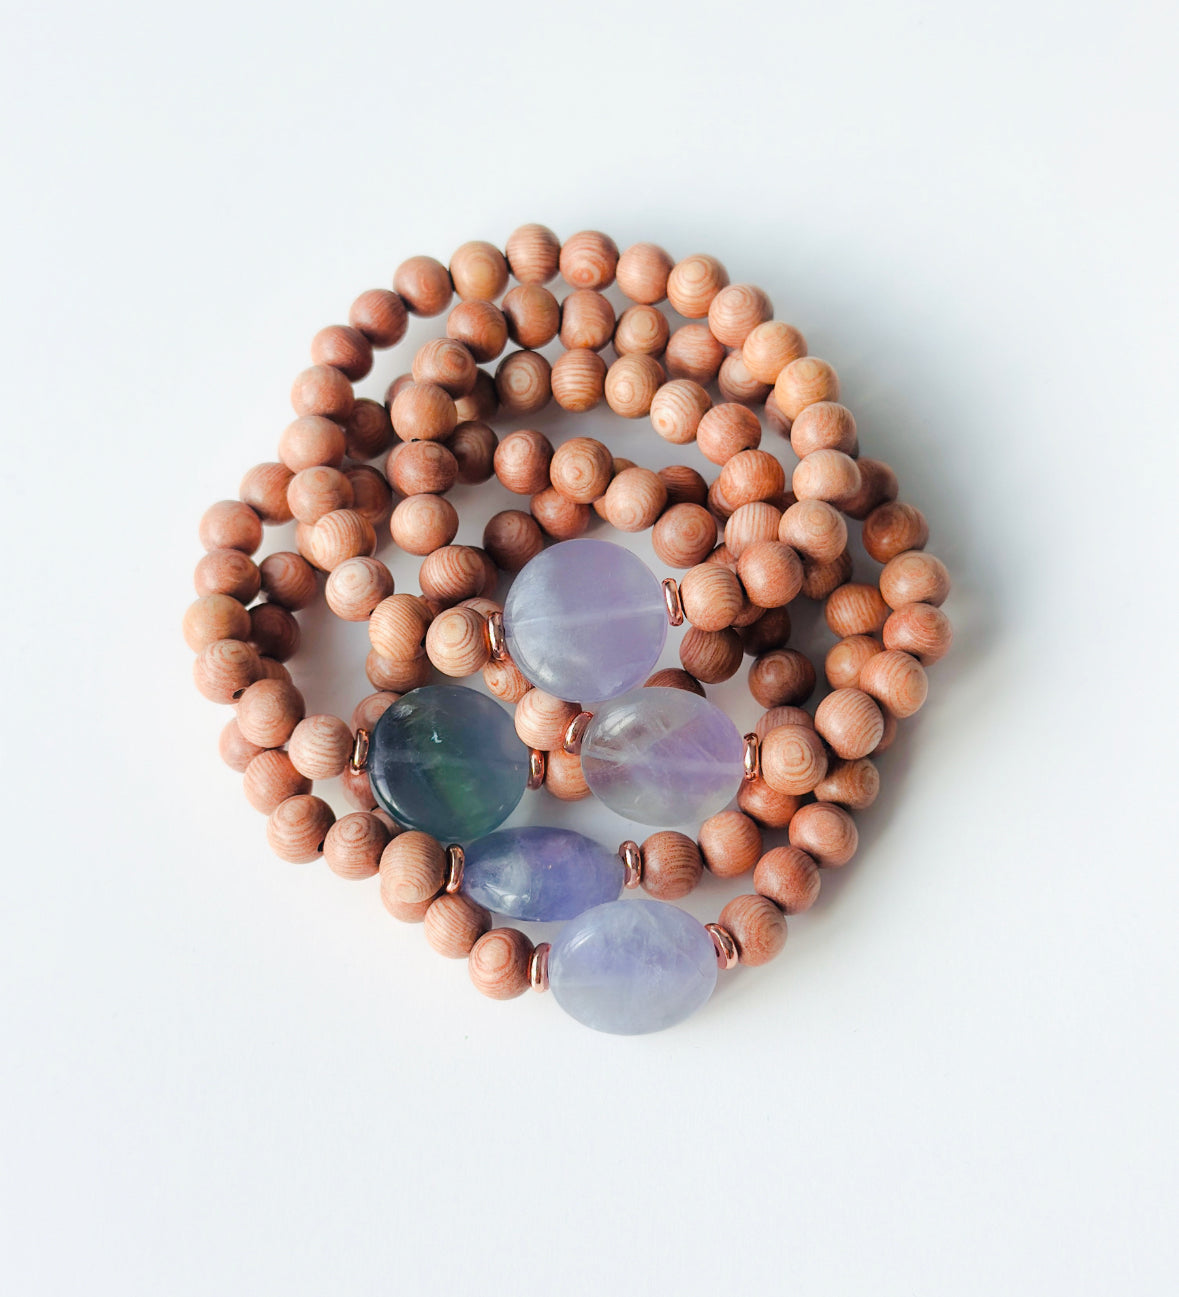 Rosewood bracelet with a Fluorite focal bead